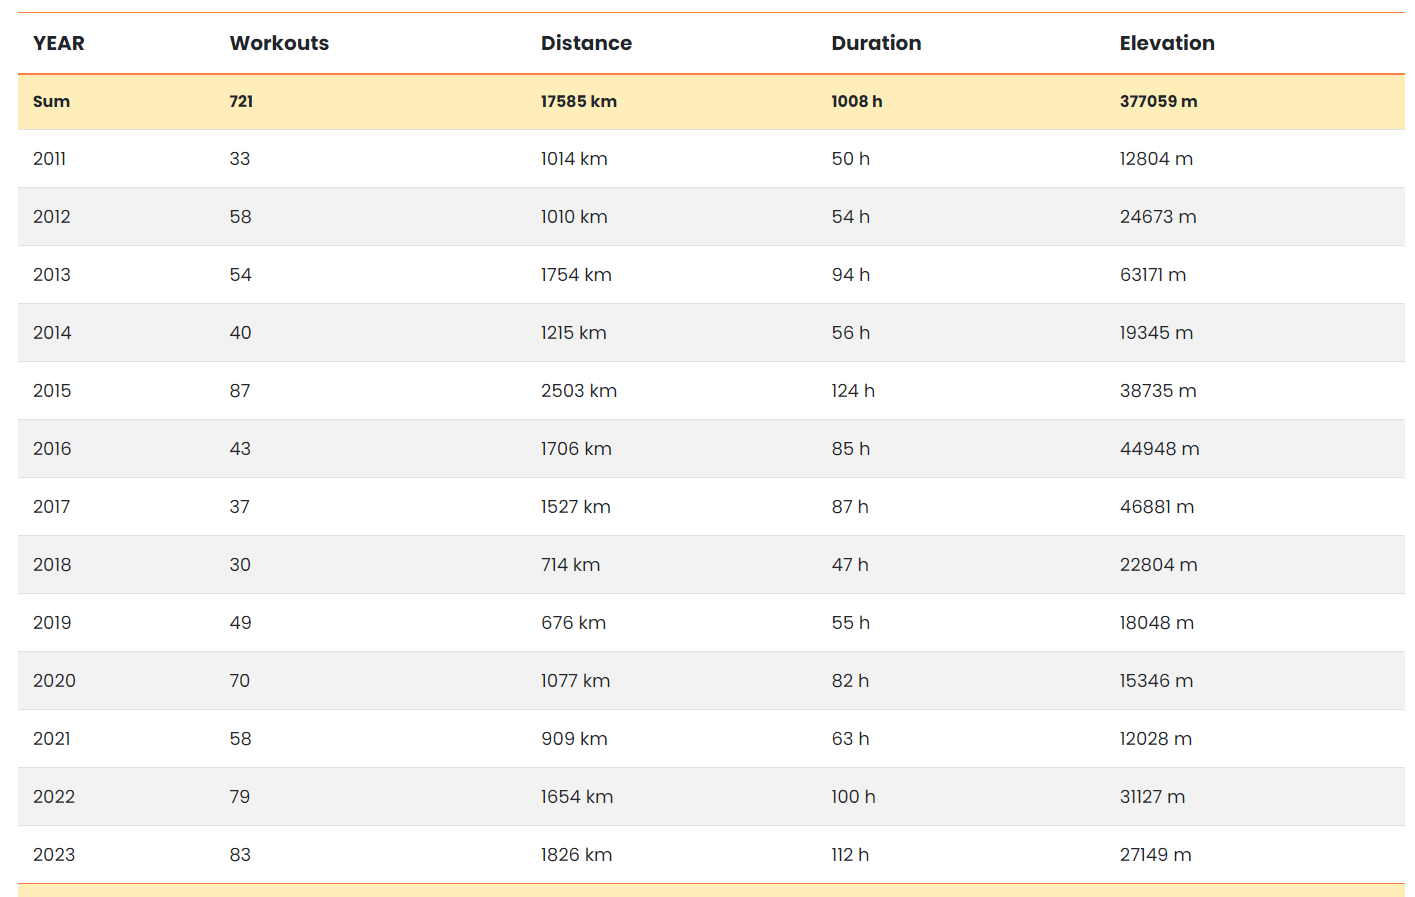 All time statisitstics of Strava actictivities displayed in table